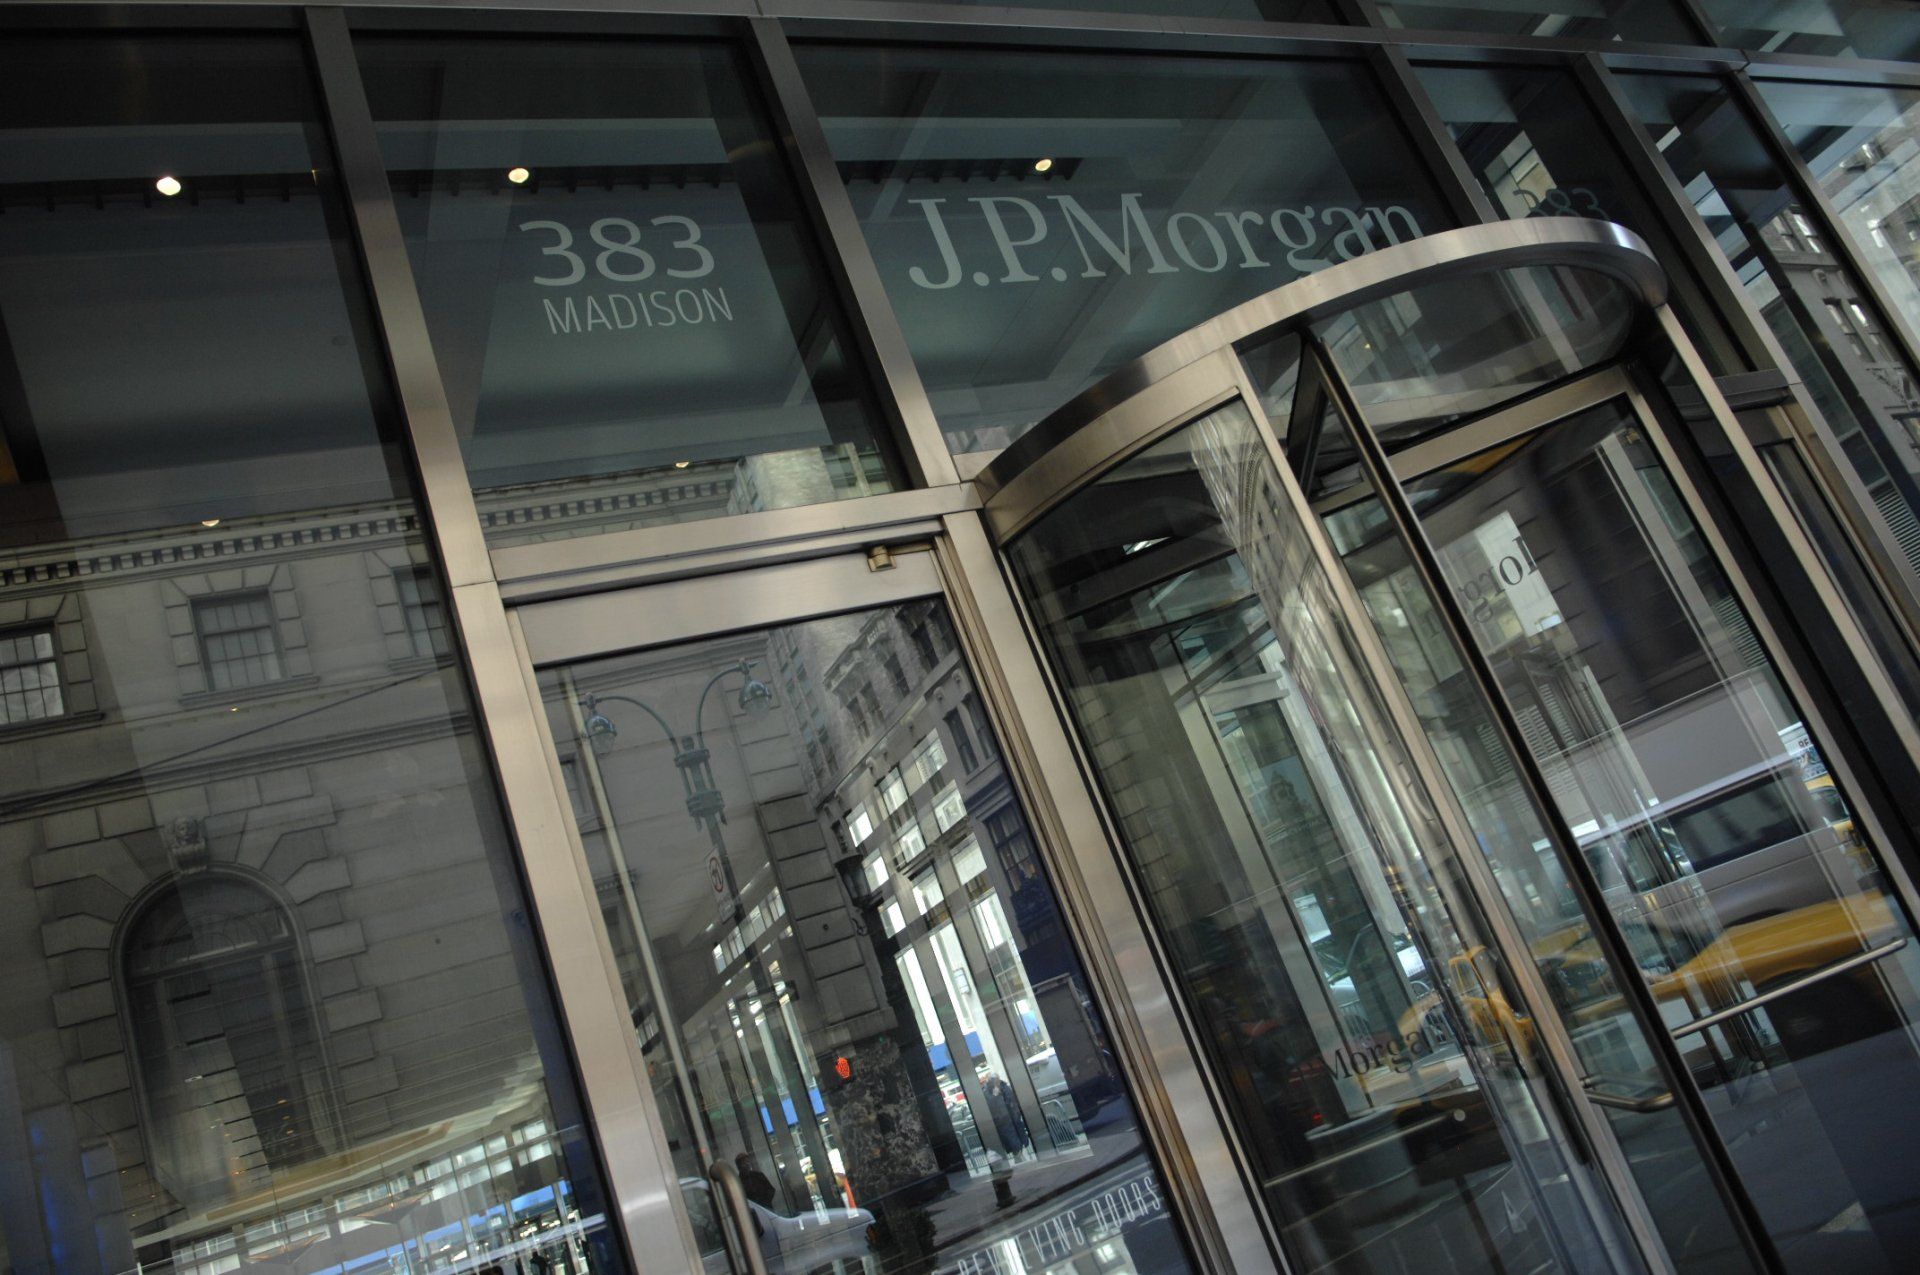 World's Most Systemically Important Bank: JP Morgan Chase & Co. sets world record